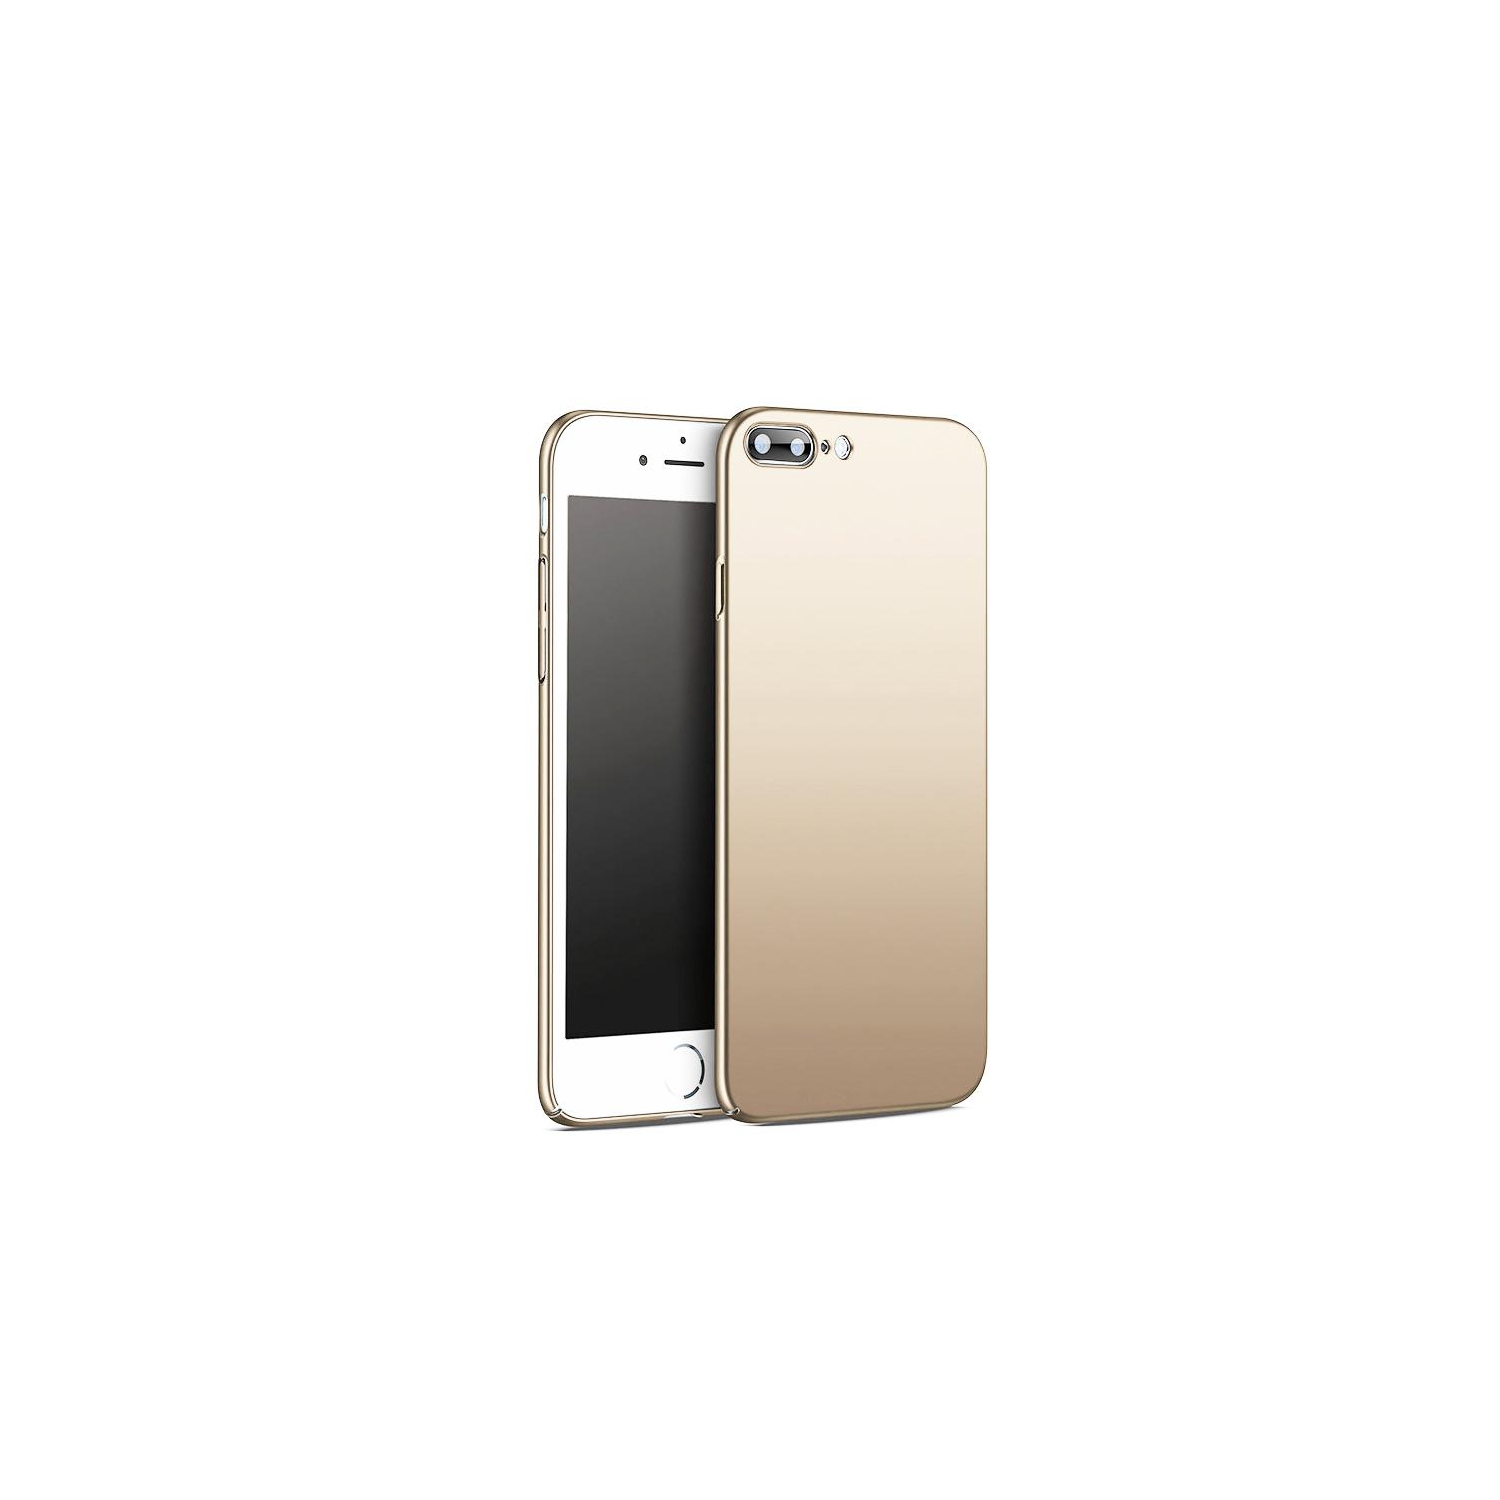 PANDACO Hard Shell Gold Case for iPhone 7 Plus or iPhone 8 Plus